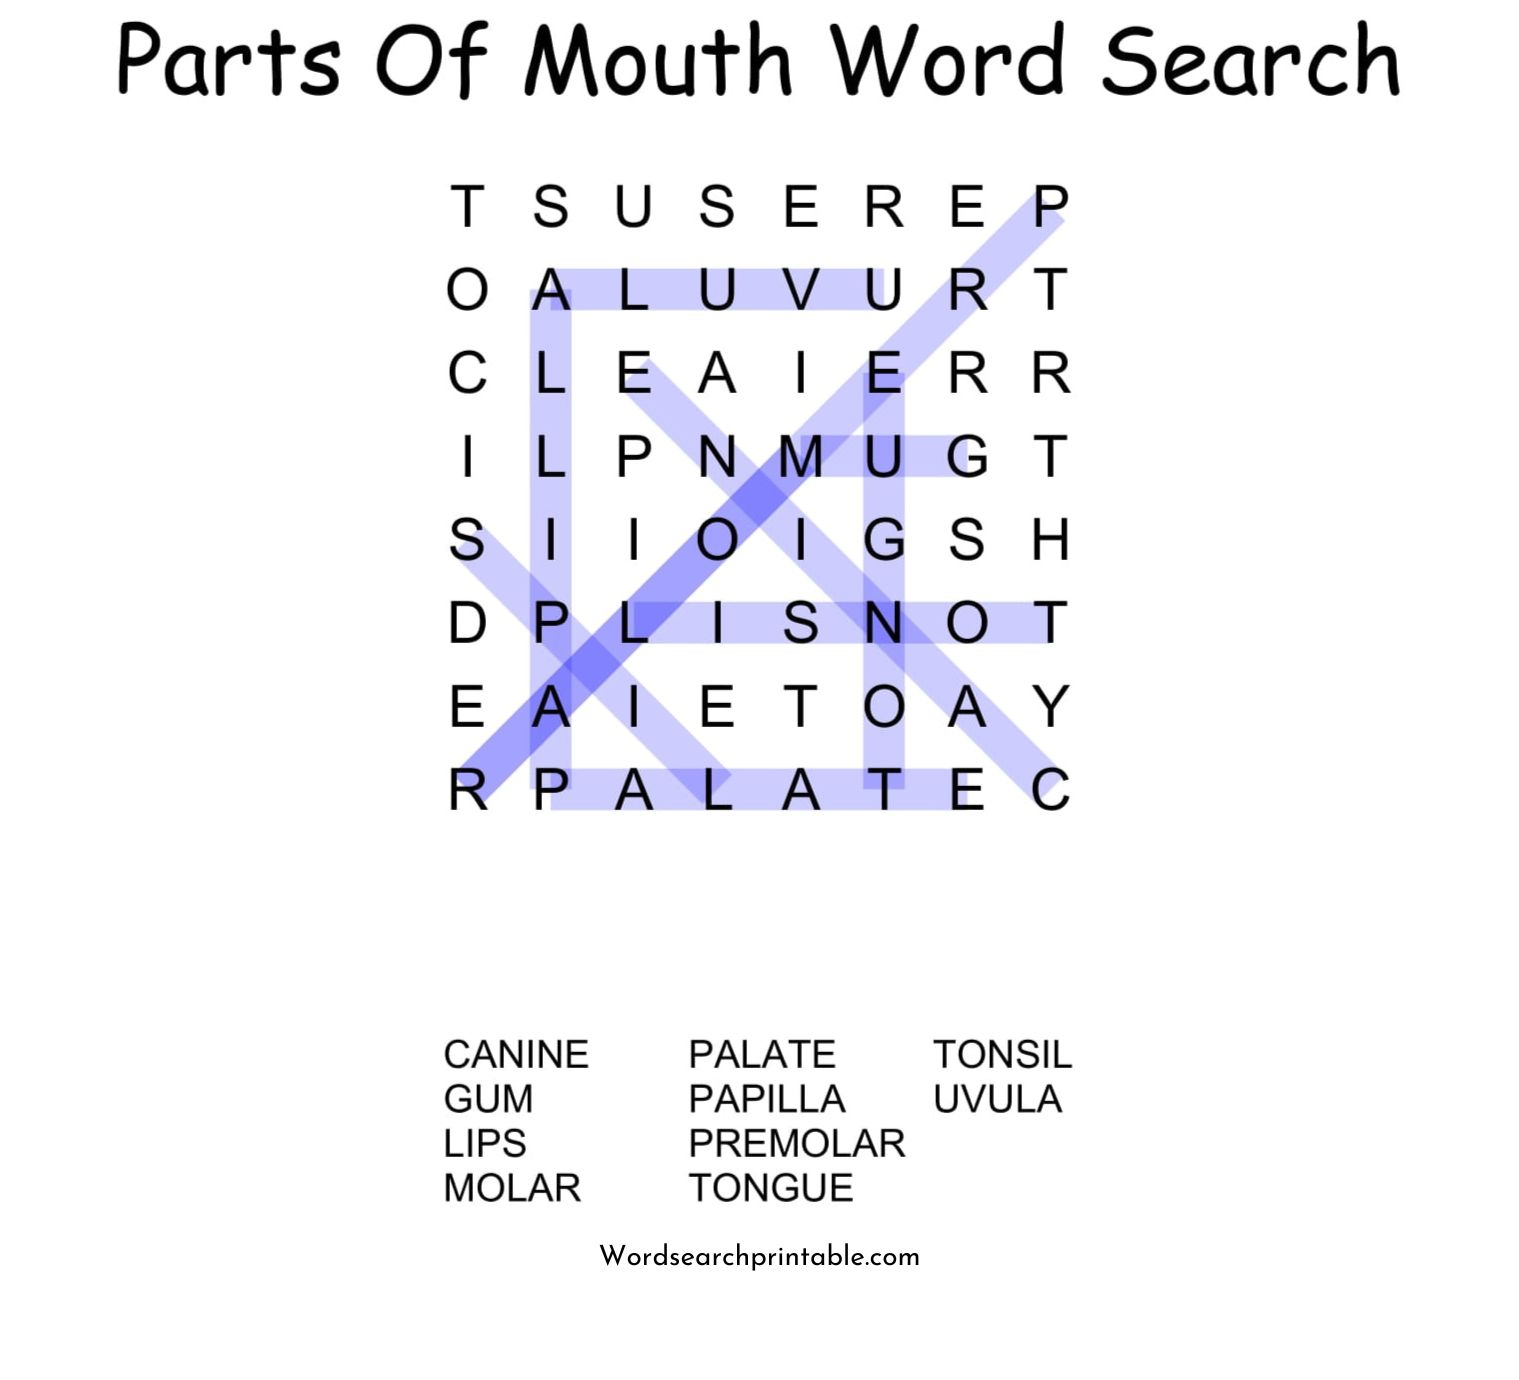 parts of mouth word search puzzle solution